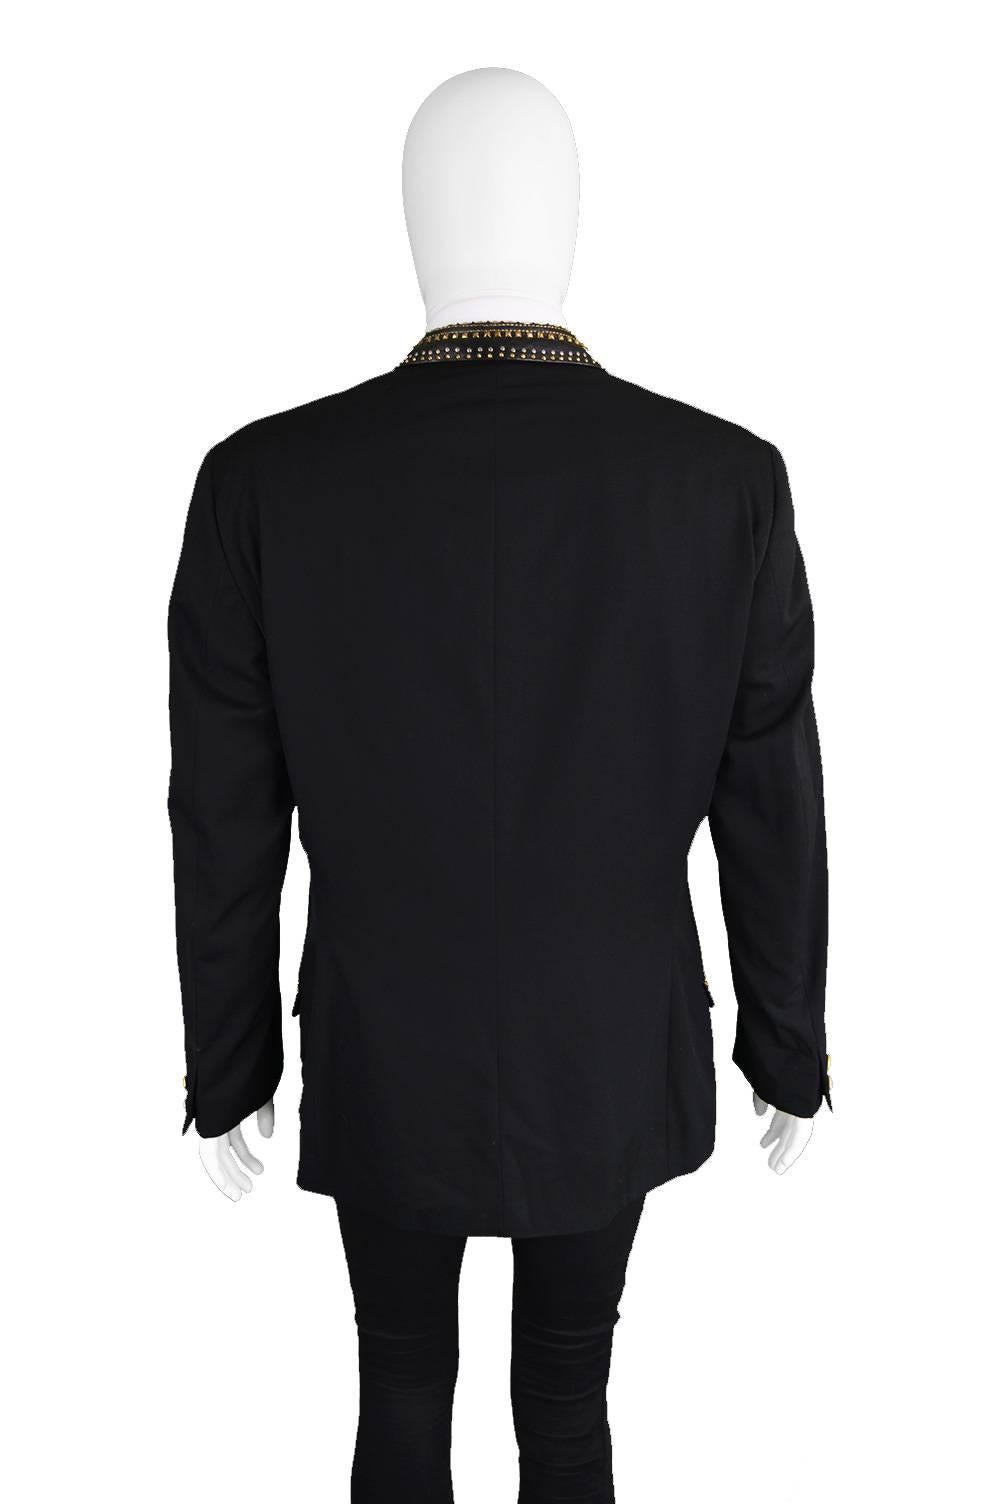 Gianni Versace 1992 Mens Wool & Leather Studded Jacket 1